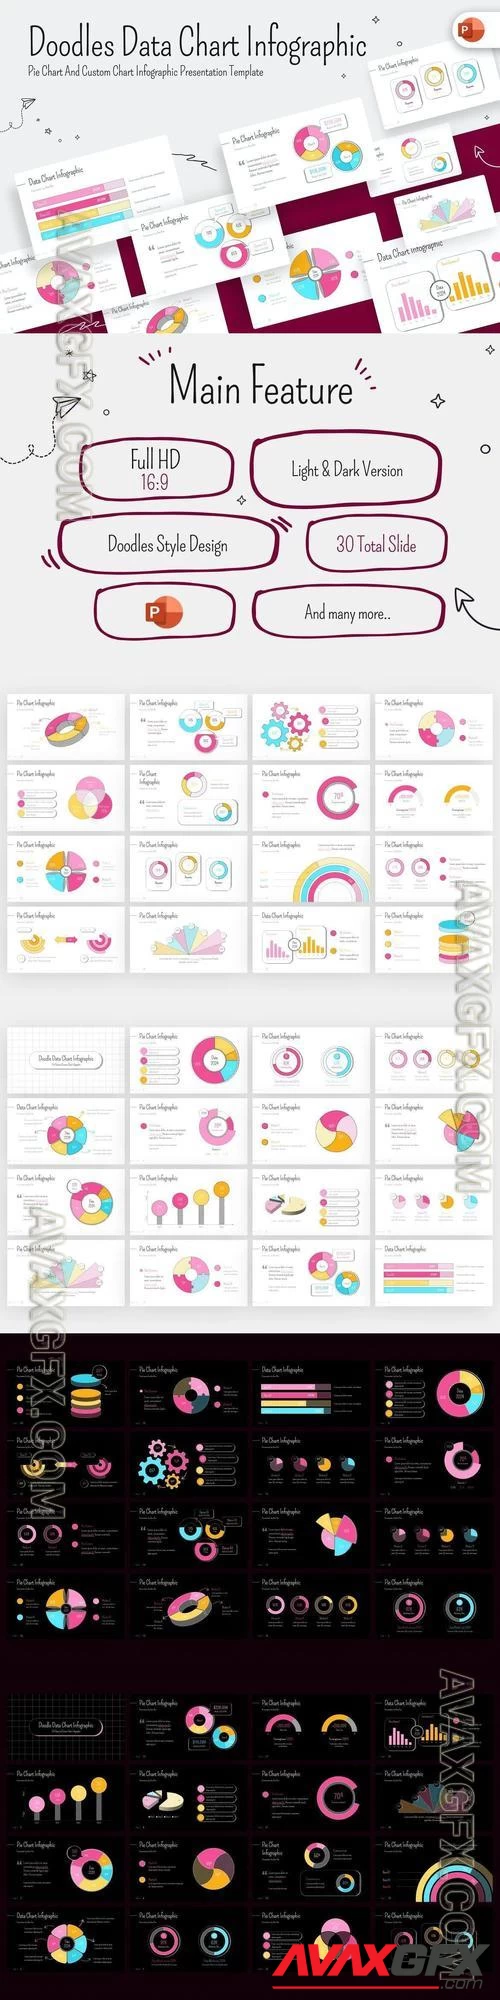 Doodle Data Chart Infographic PowerPoint Template